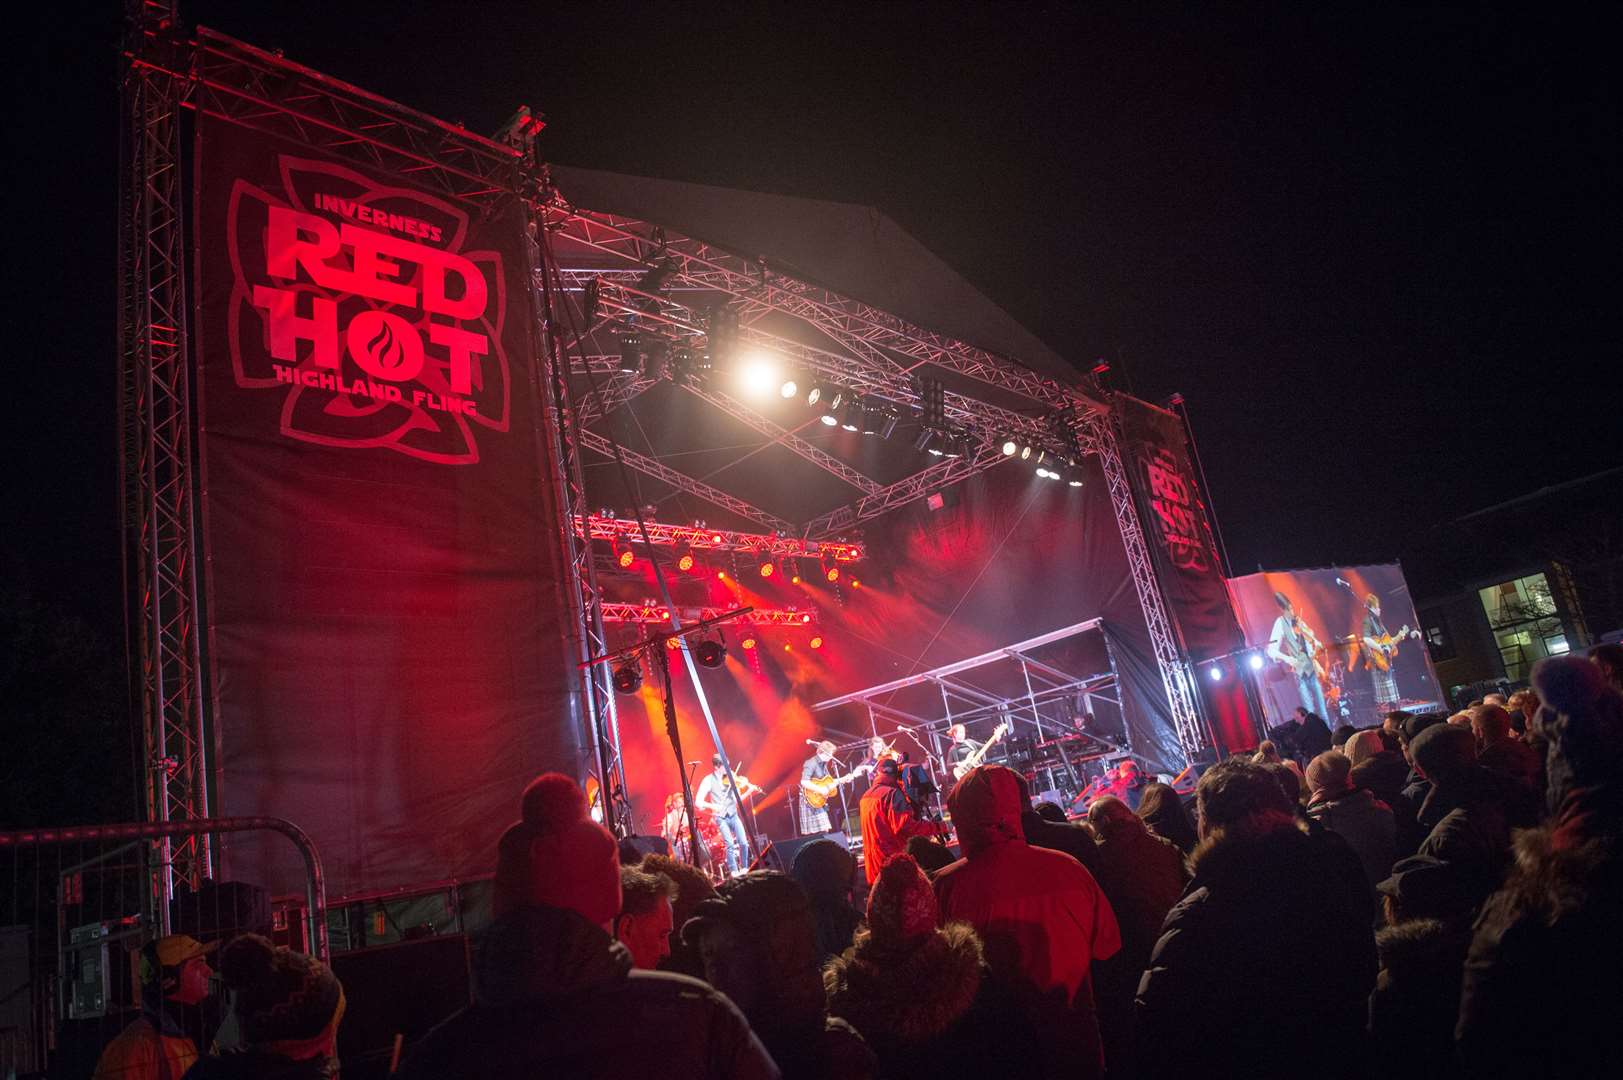 There will be no Red Hot Highland Fling at Hogmanay this year. Picture: Callum Mackay